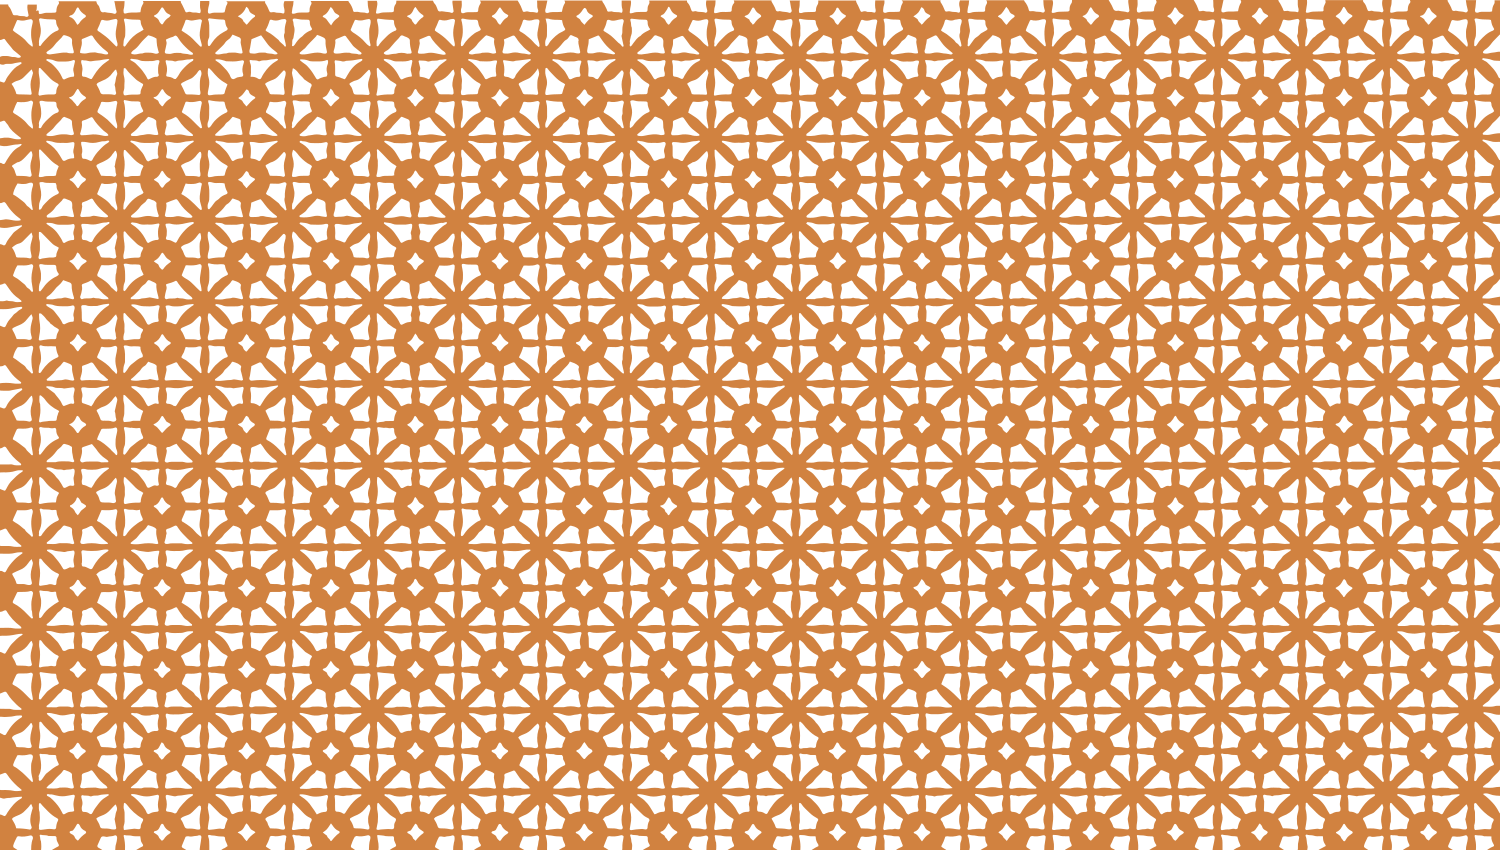 Parasoleil™ Sampoerna© pattern displayed with a ochre color overlay